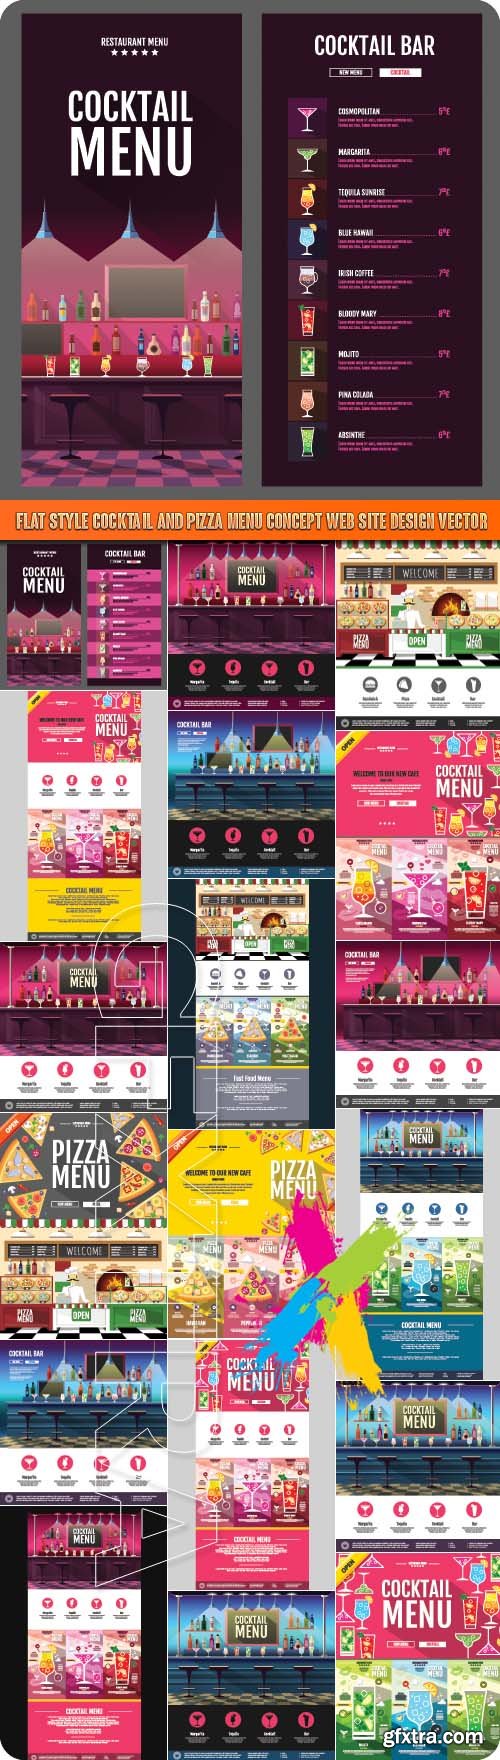 Flat style cocktail and pizza menu concept web site design vector